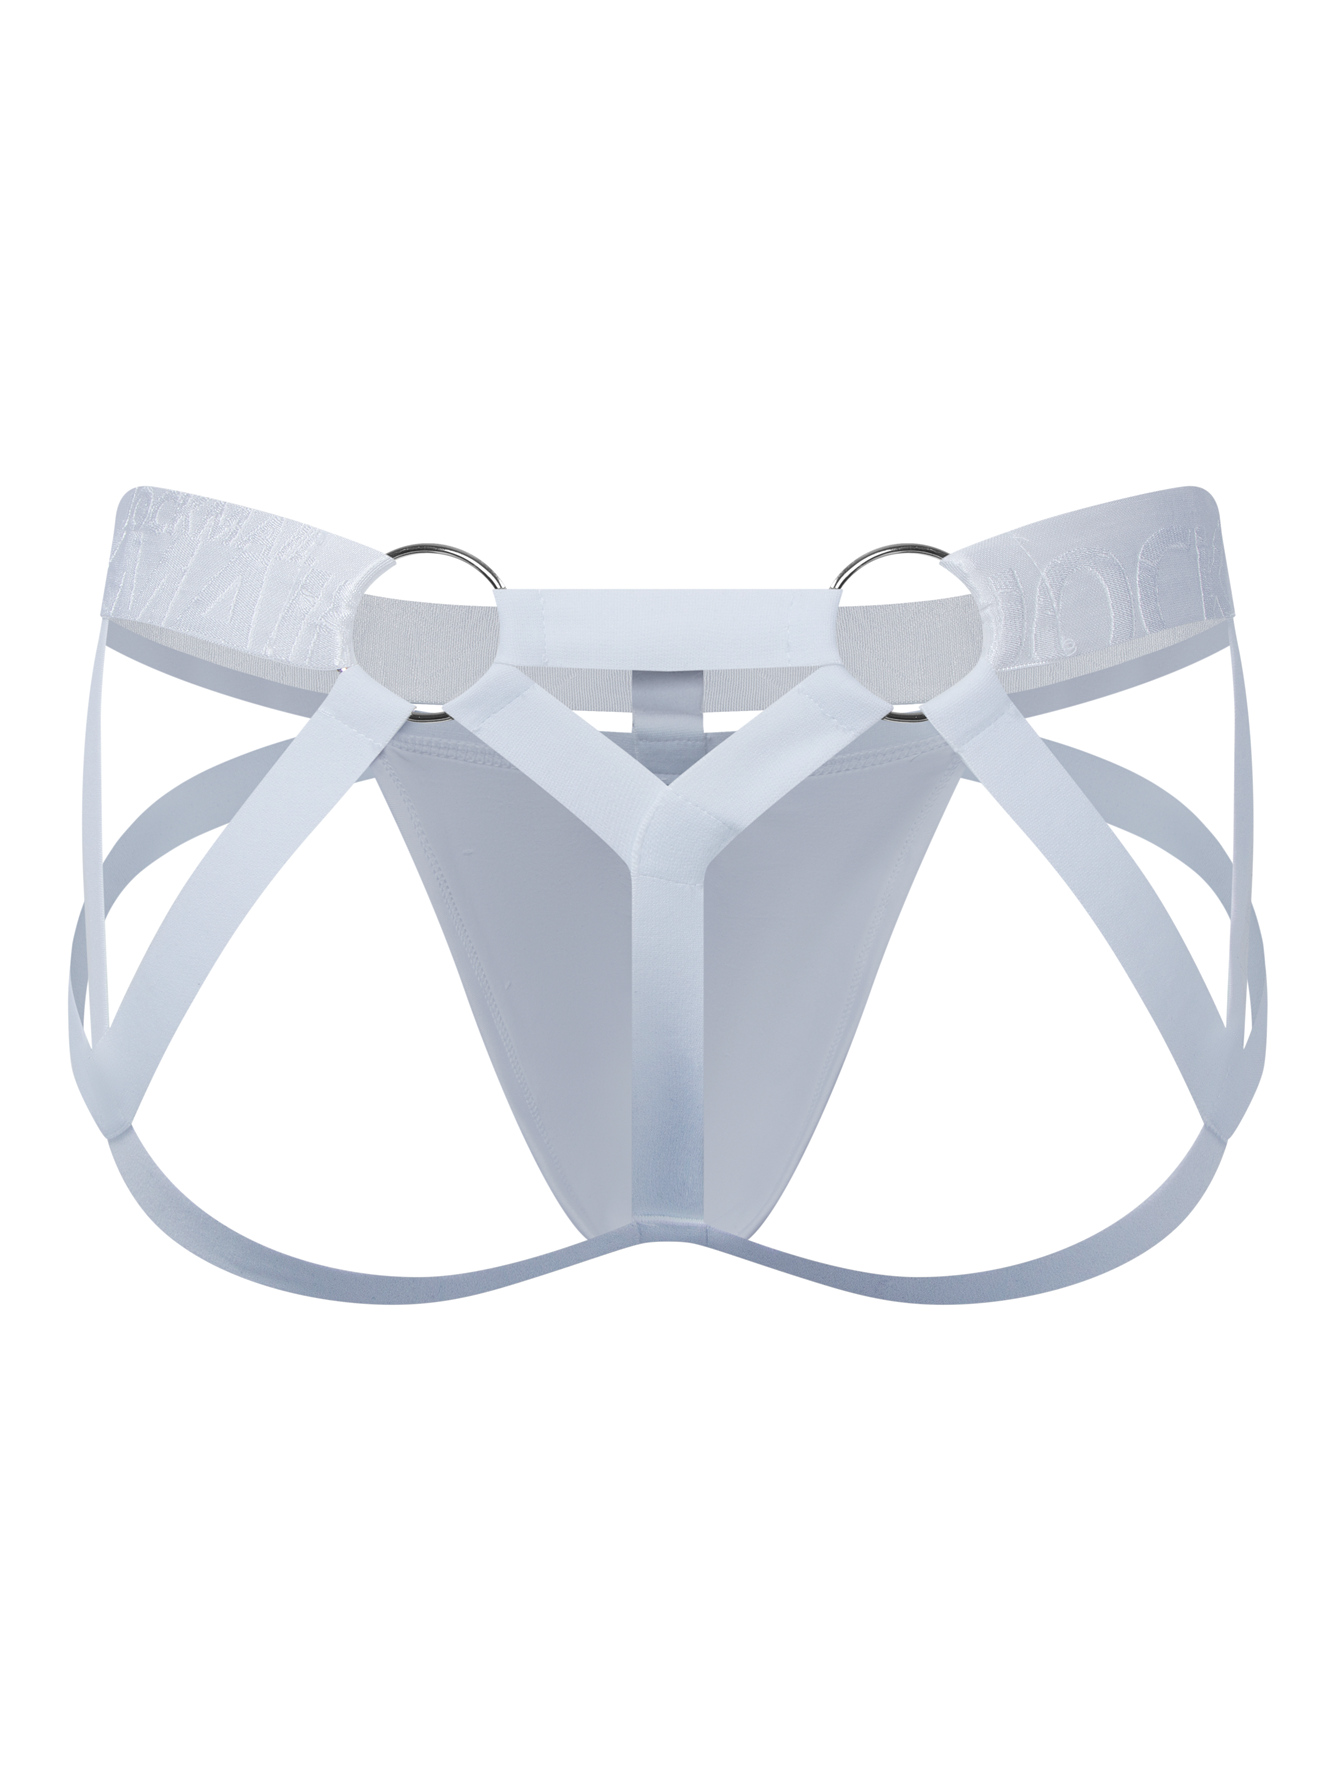 Buy MERSODA White Polyester and Spandex Jockstraps Underwear with